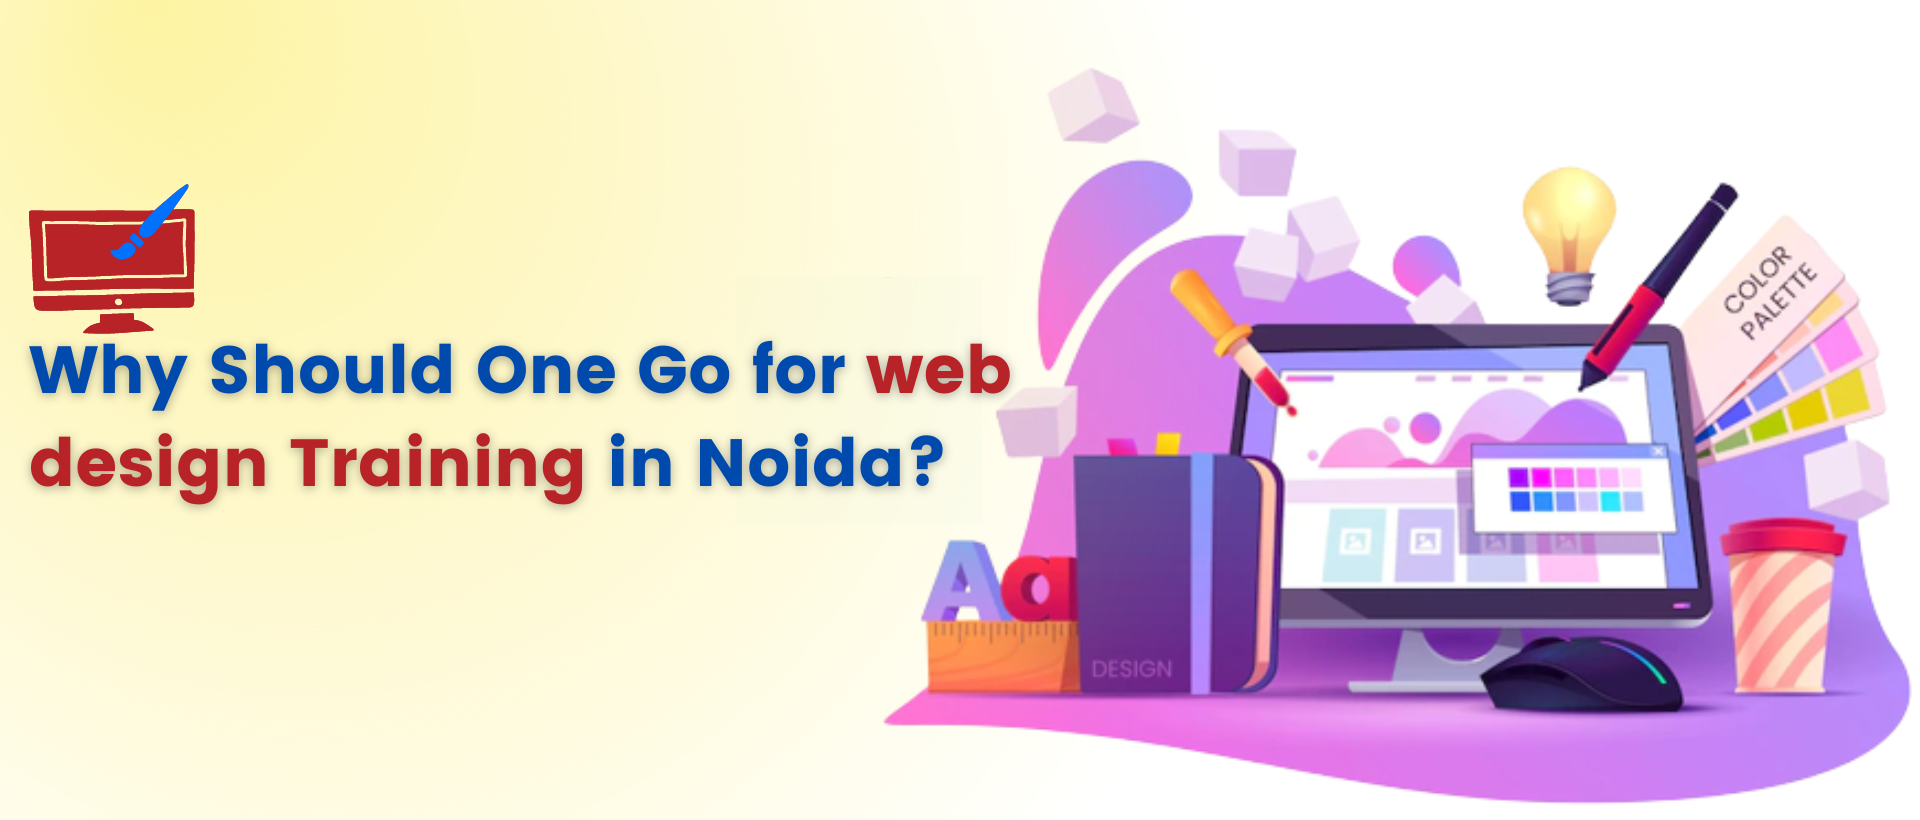 Why Should One Go for web design Training in Noida?